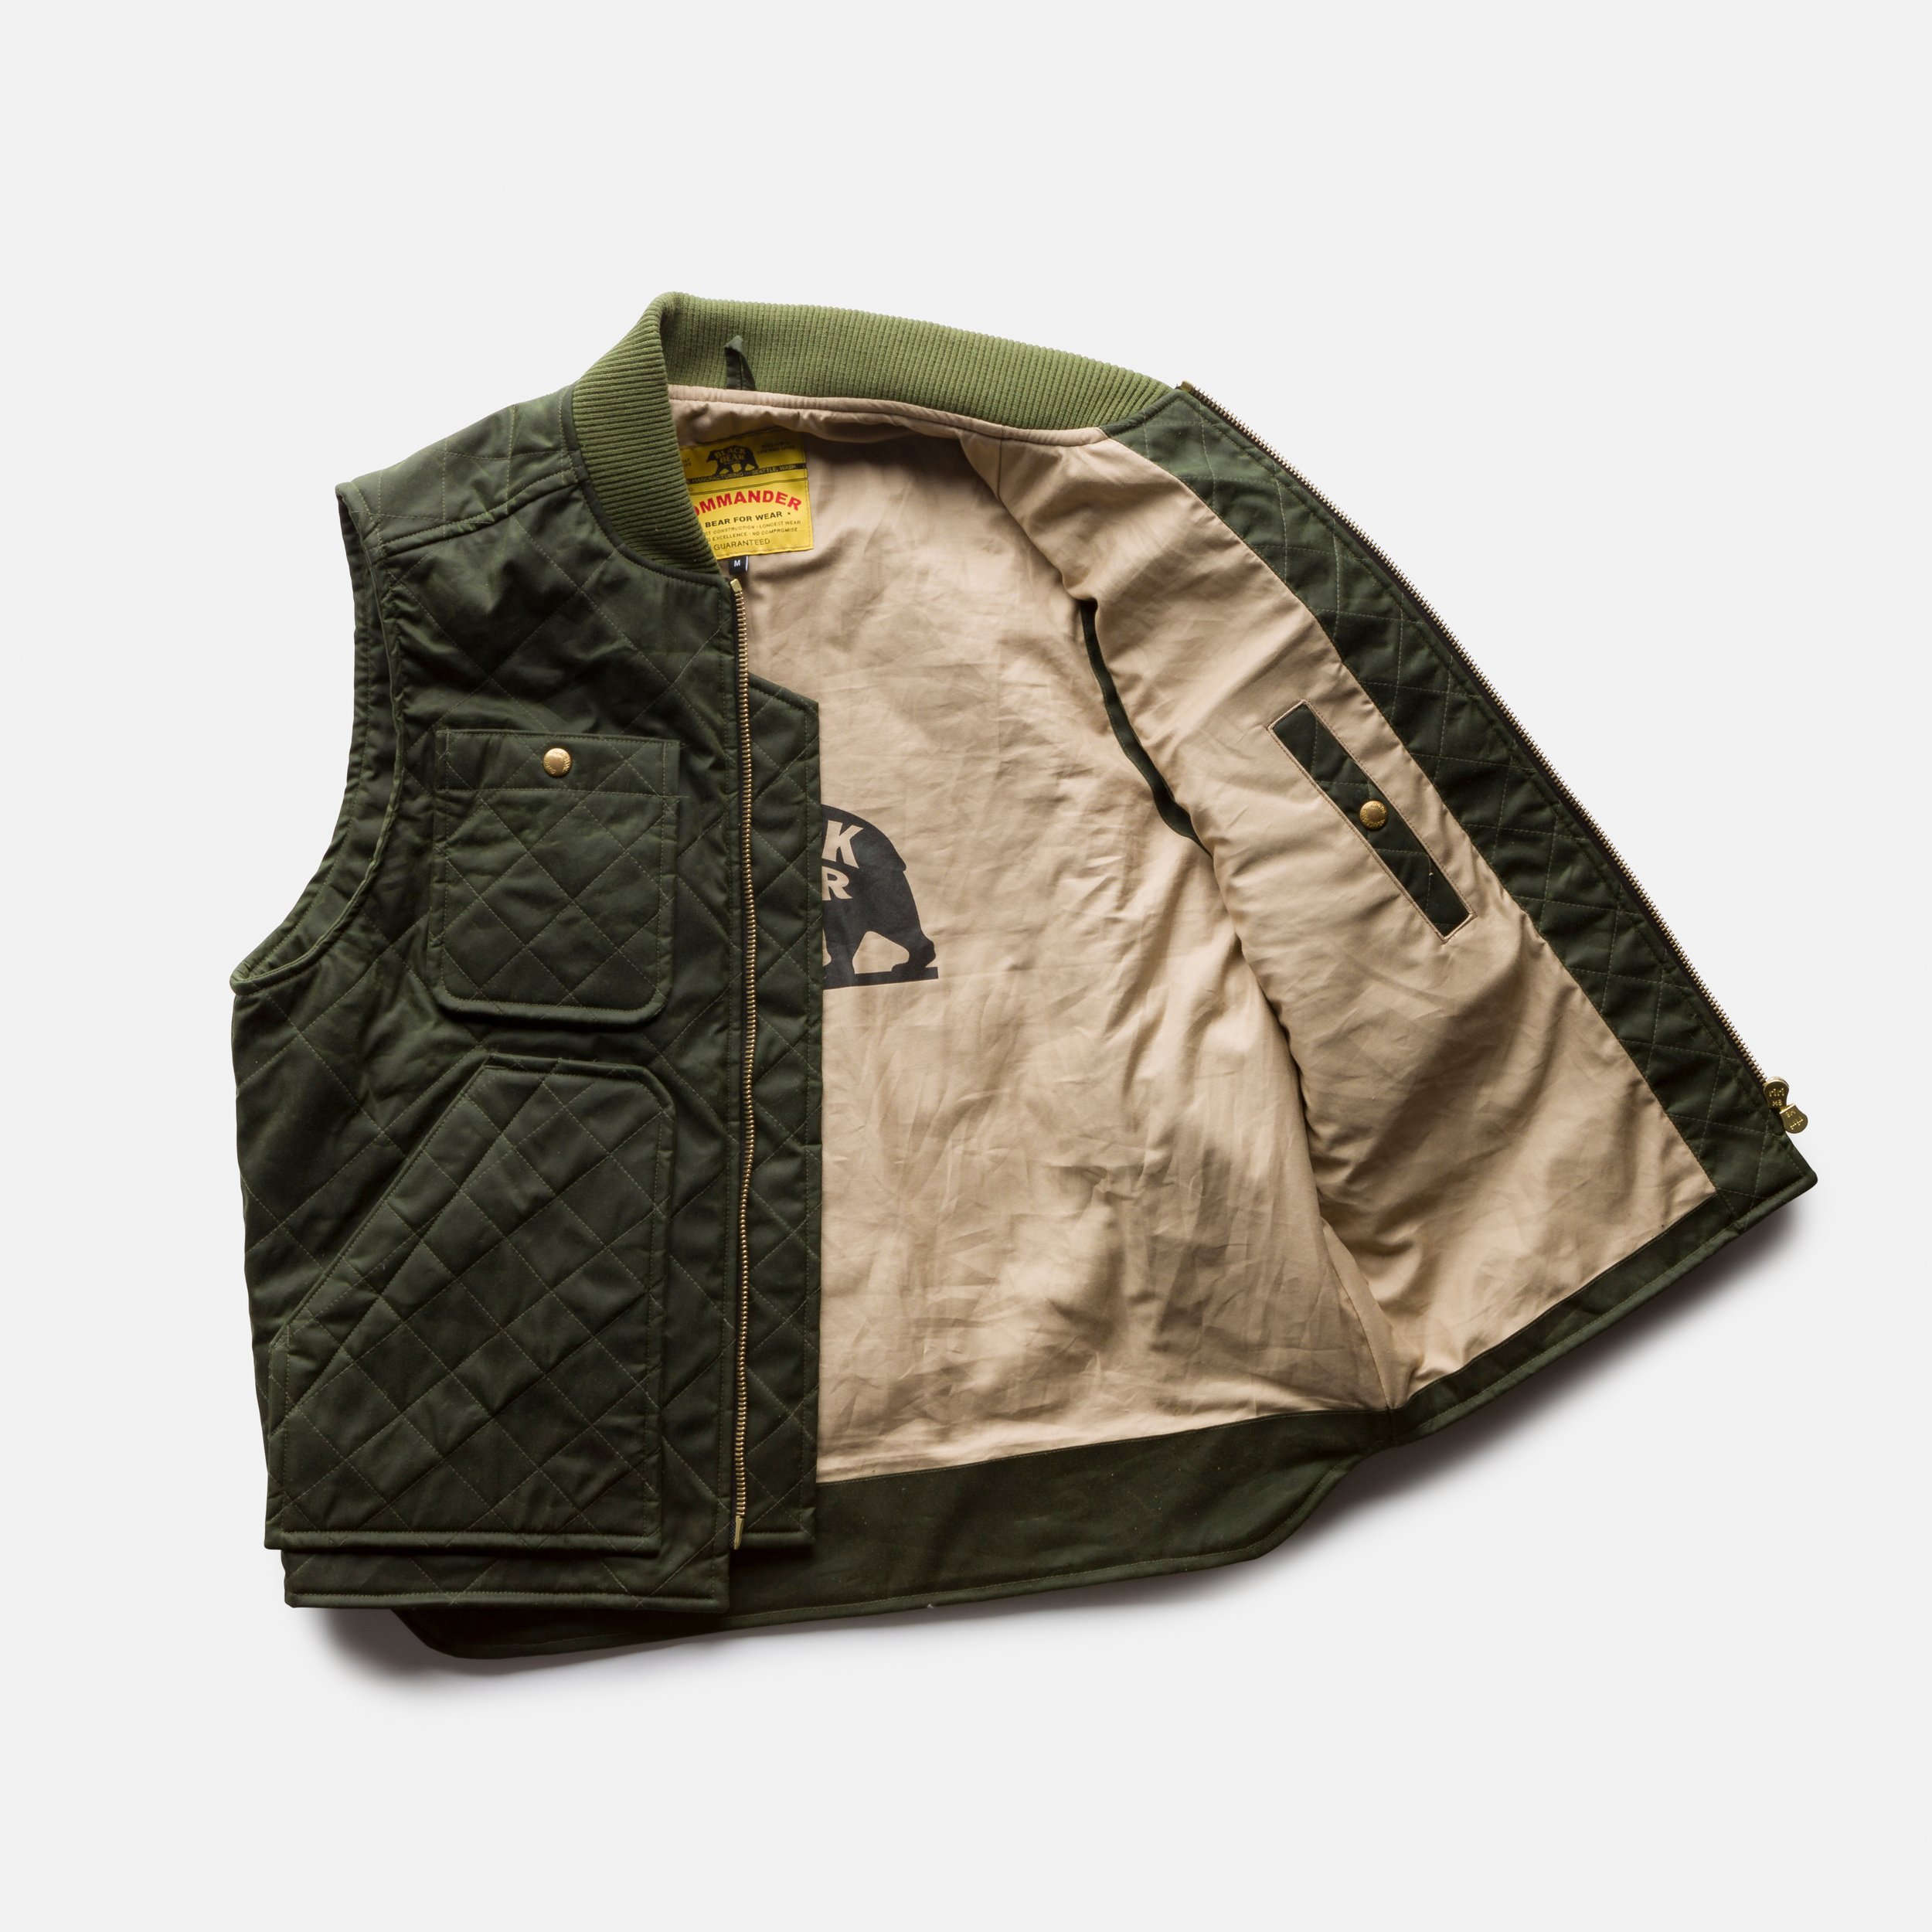 The Ultimate Wax Canvas Vest by Black Bear Brand